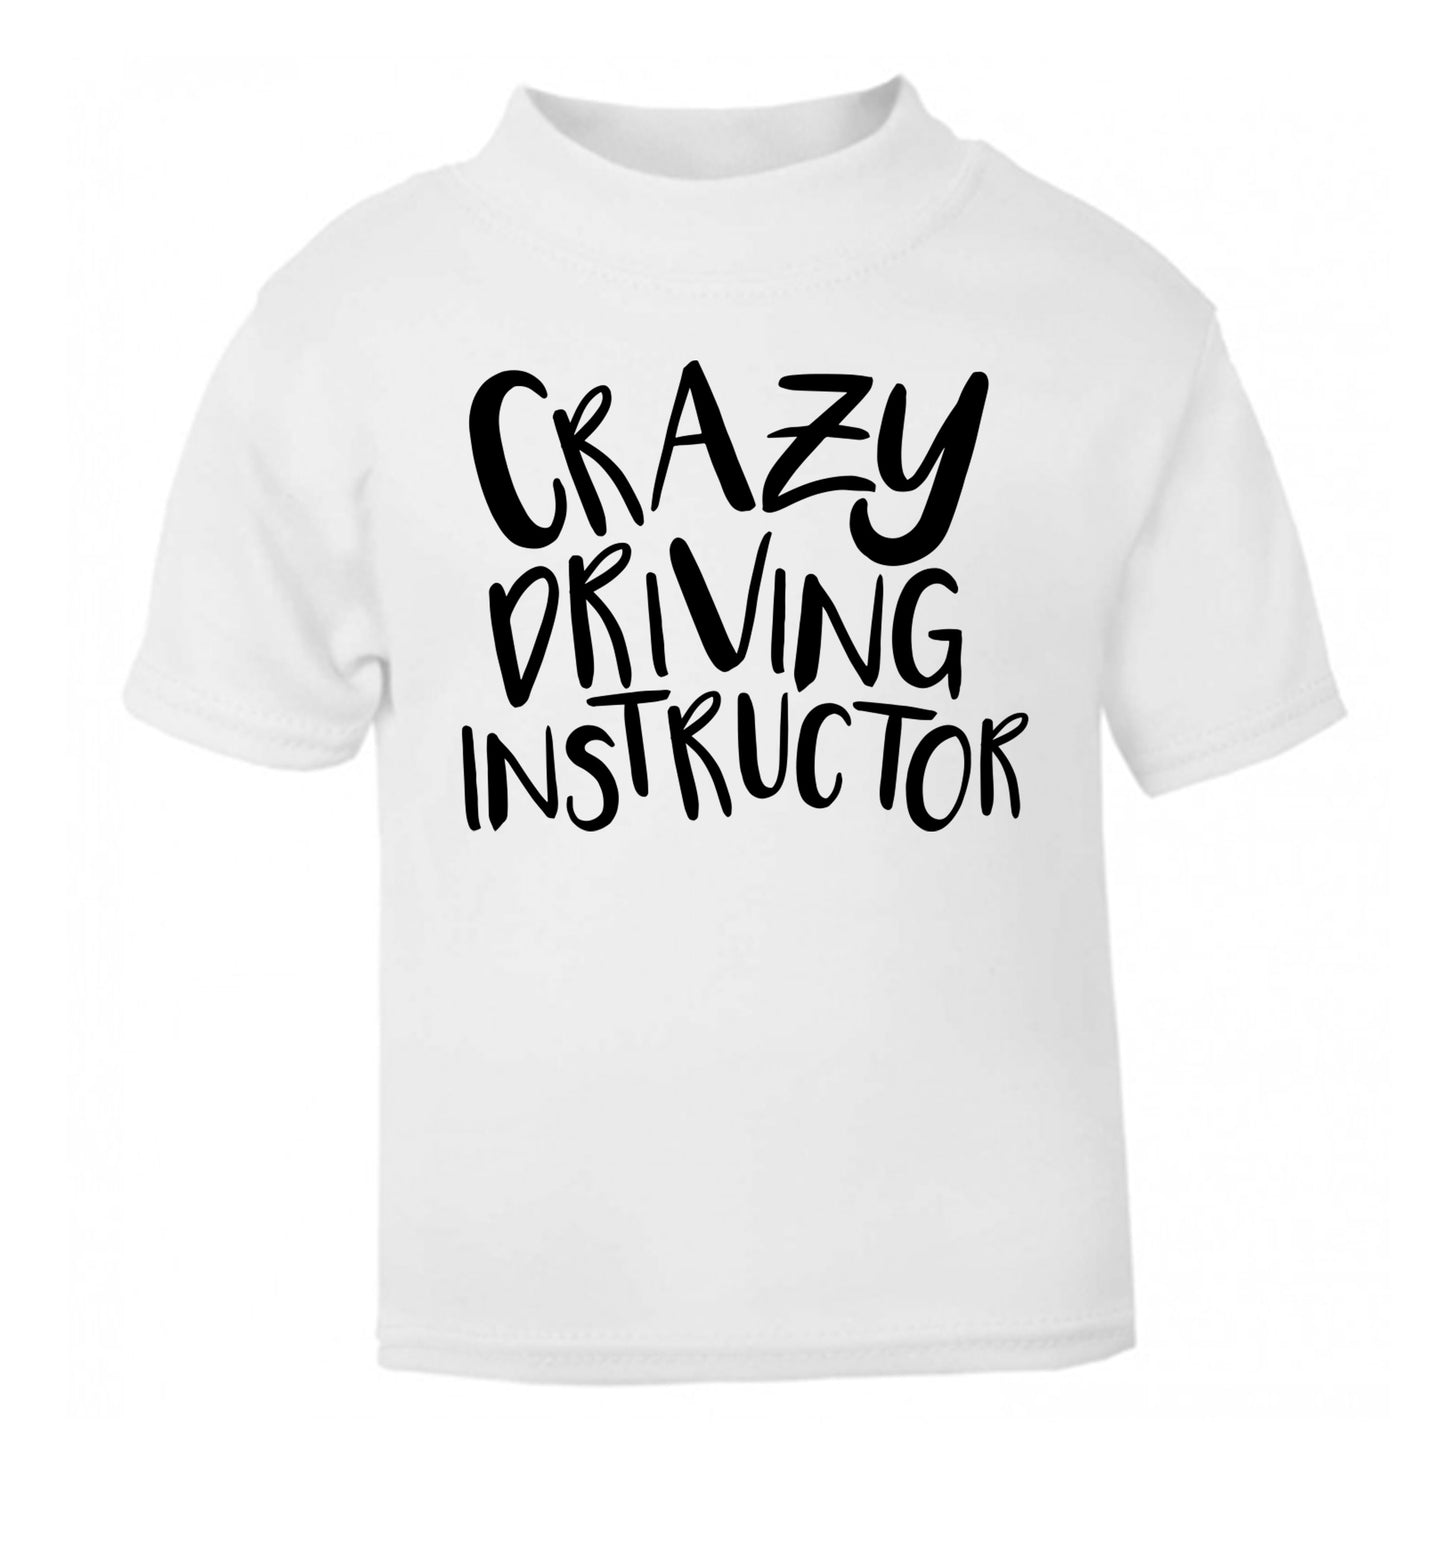 Crazy driving instructor white Baby Toddler Tshirt 2 Years